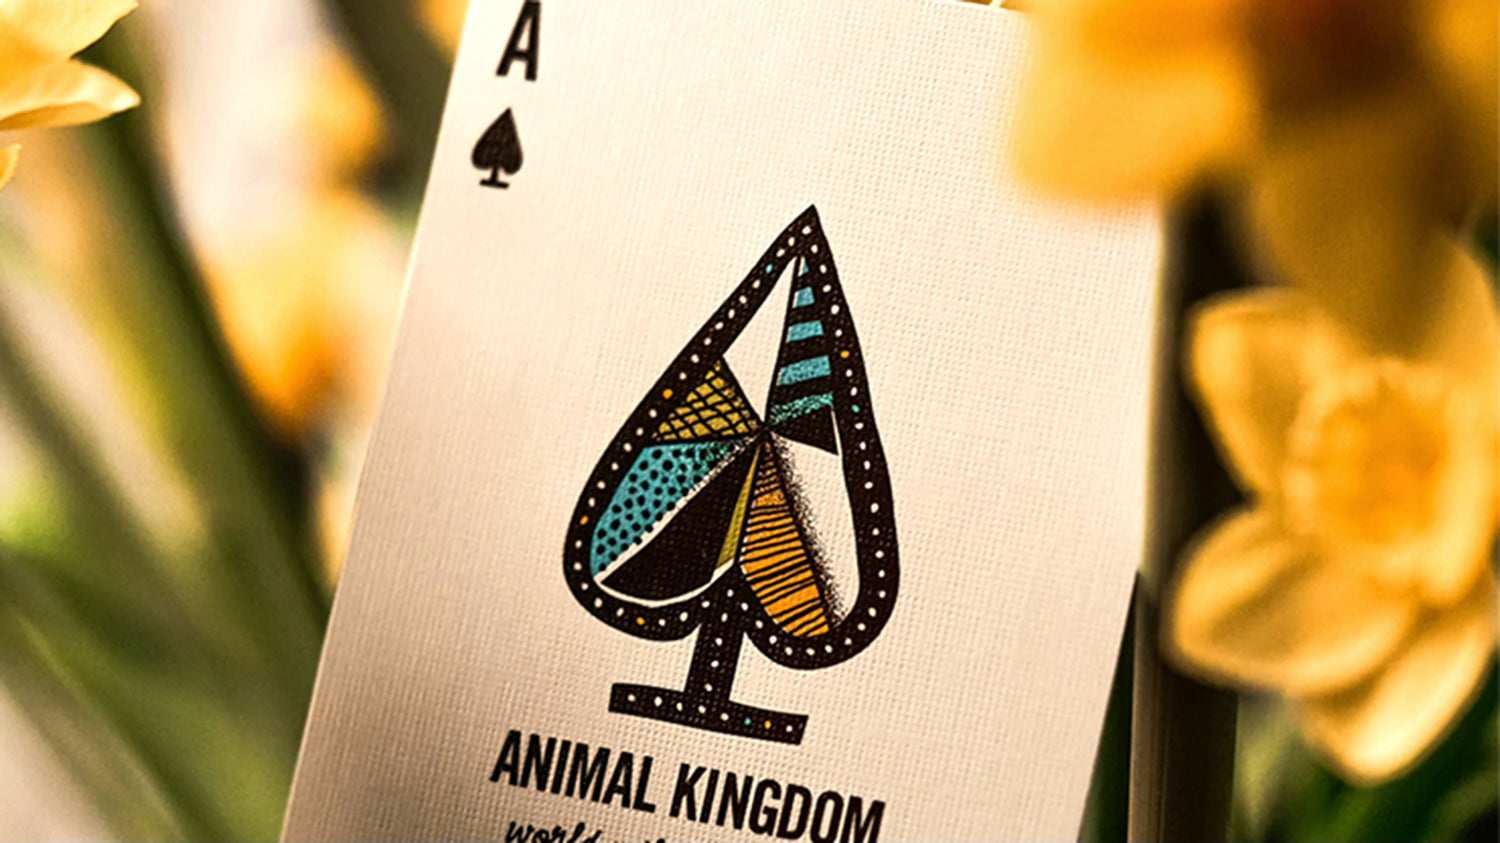 Animal Kingdom by theory11 : Playing cards, Poker, Magic, Cardistry, Singapore